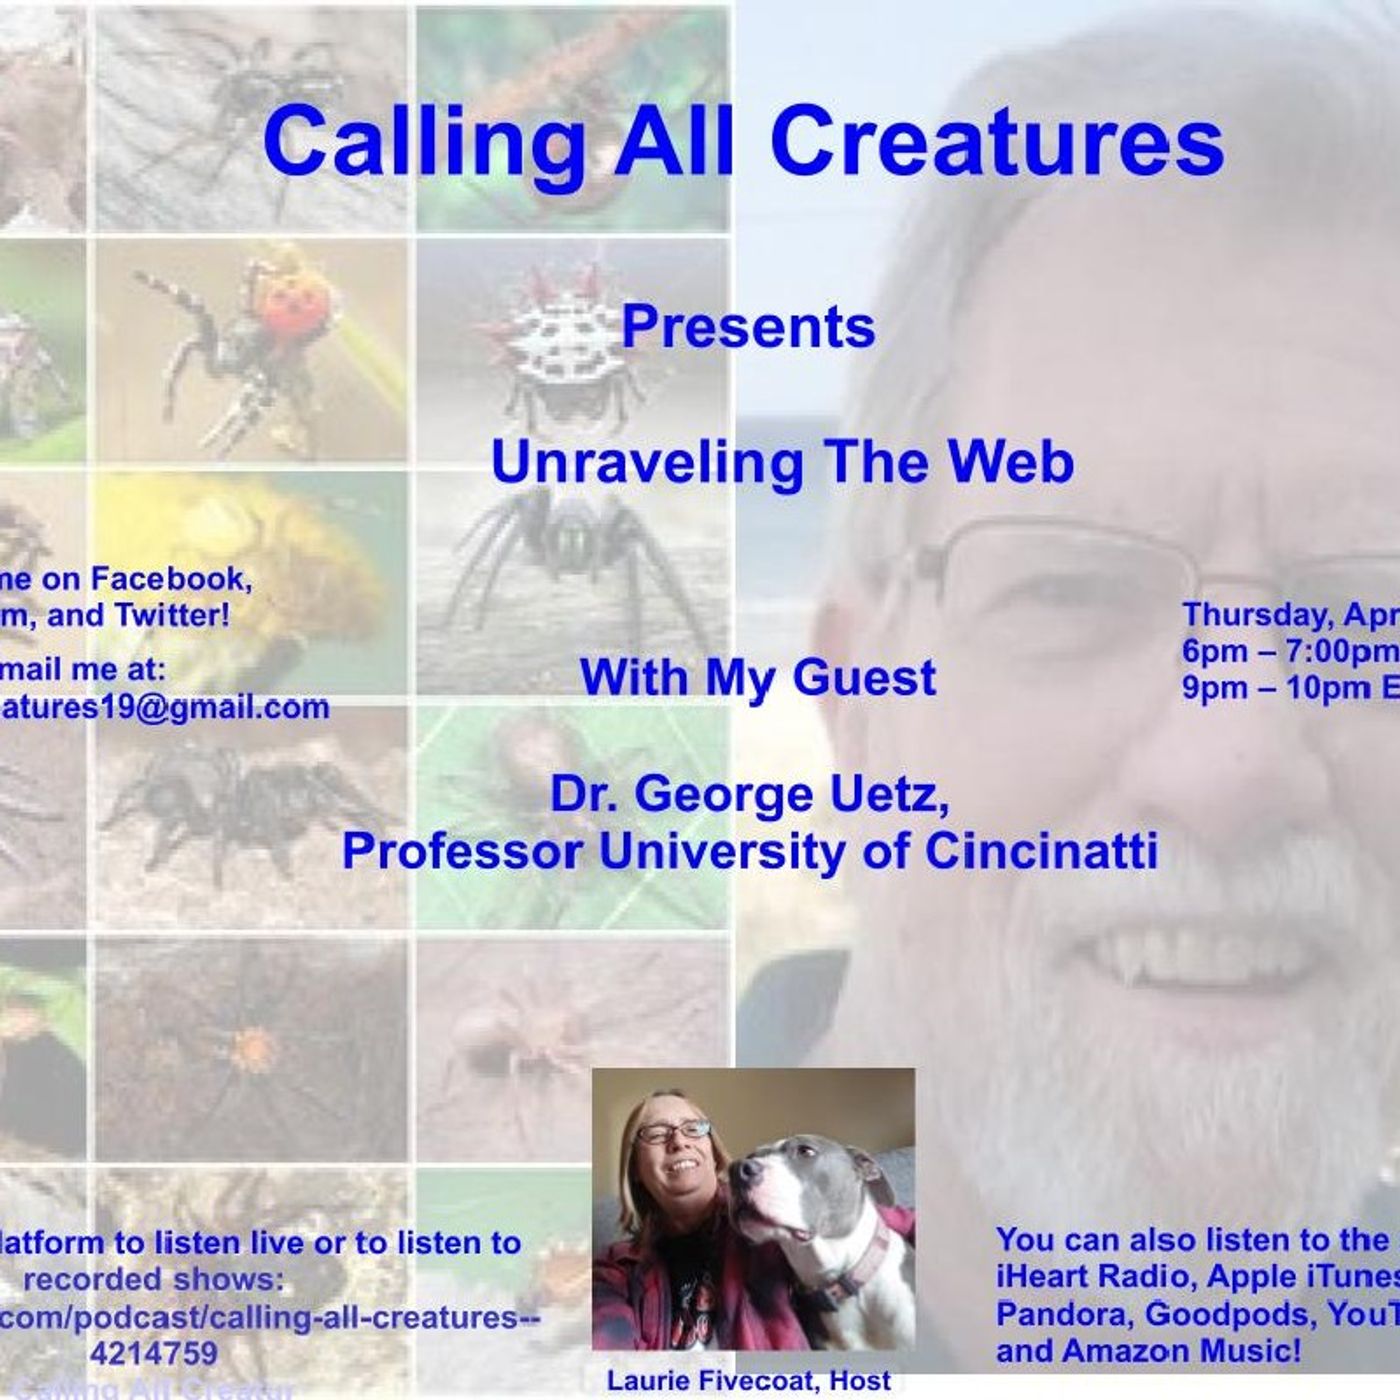 Calling All Creatures Presents Unraveling The Web